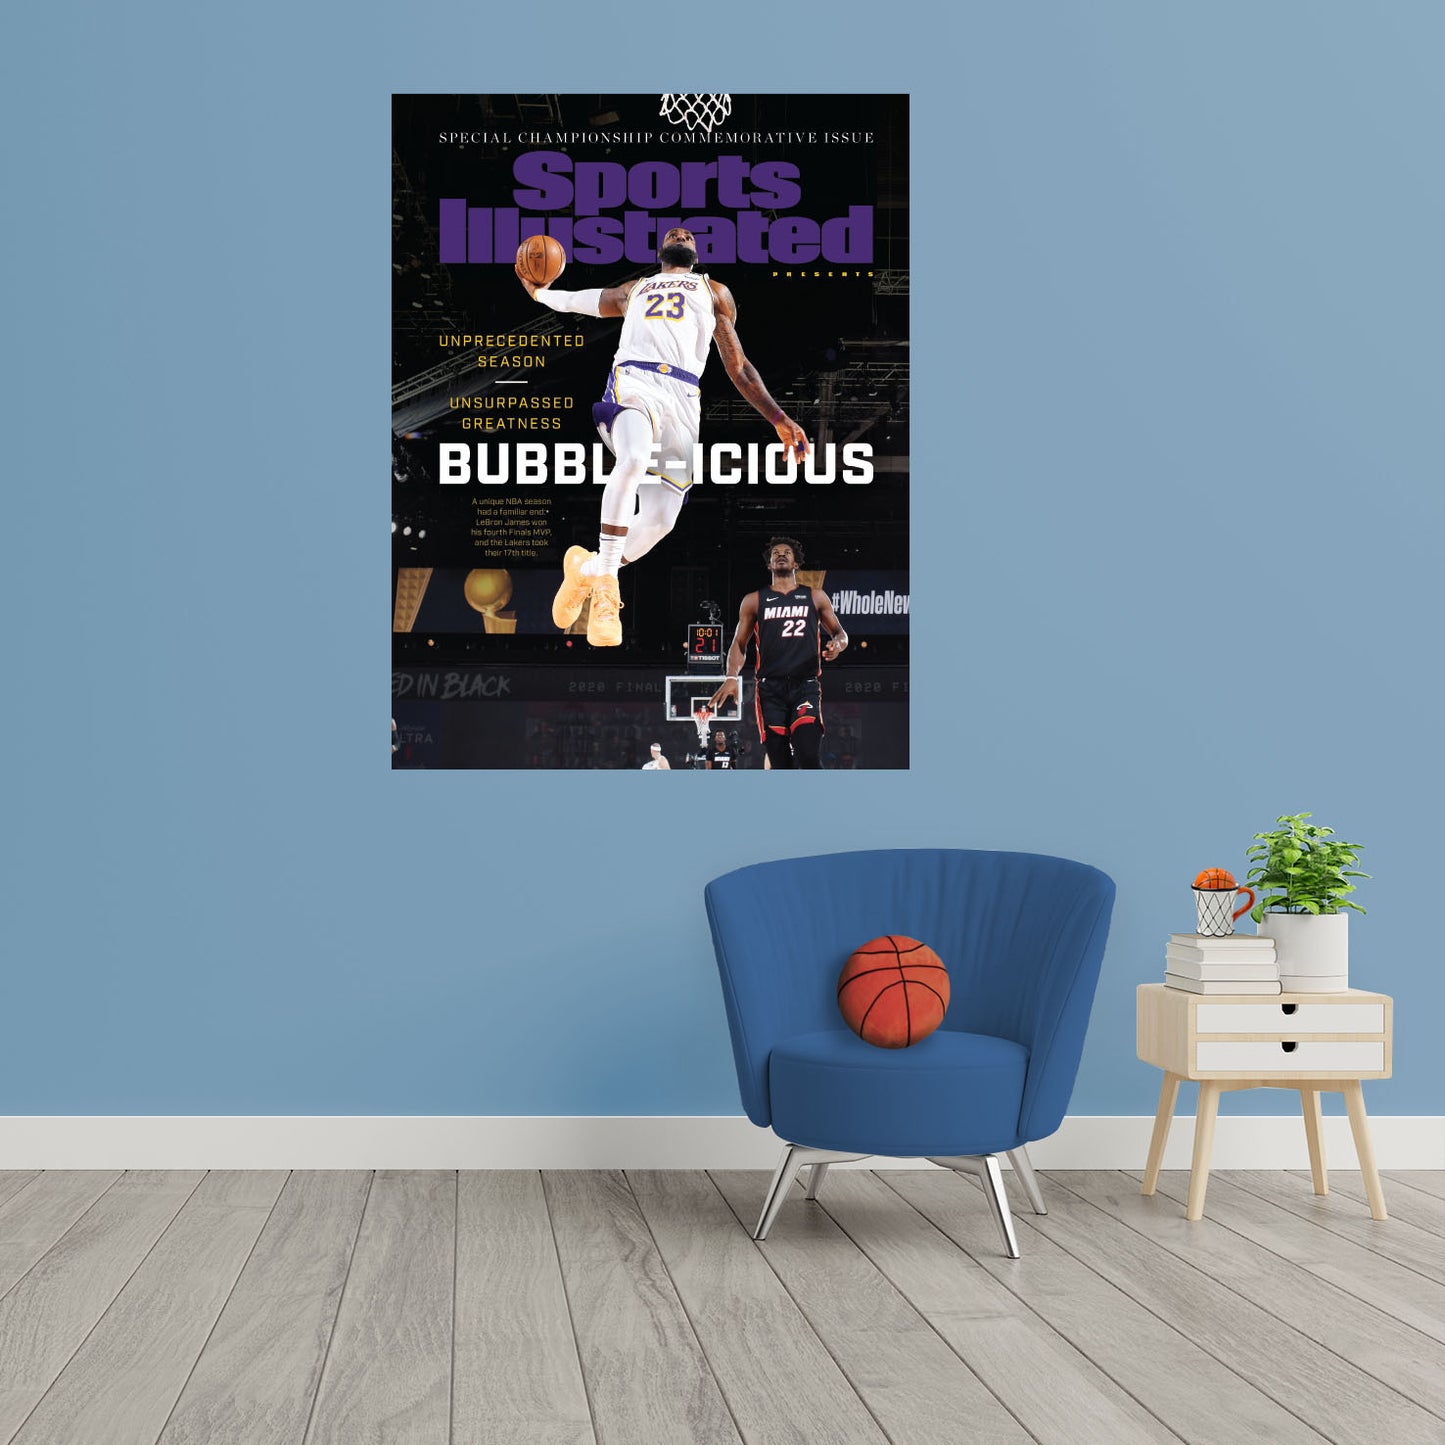 Los Angeles Lakers: LeBron James 2020 NBA Championship Commemorative Issue Sports Illustrated Cover Sports Illustrated Cover        - Officially Licensed NBA Removable     Adhesive Decal